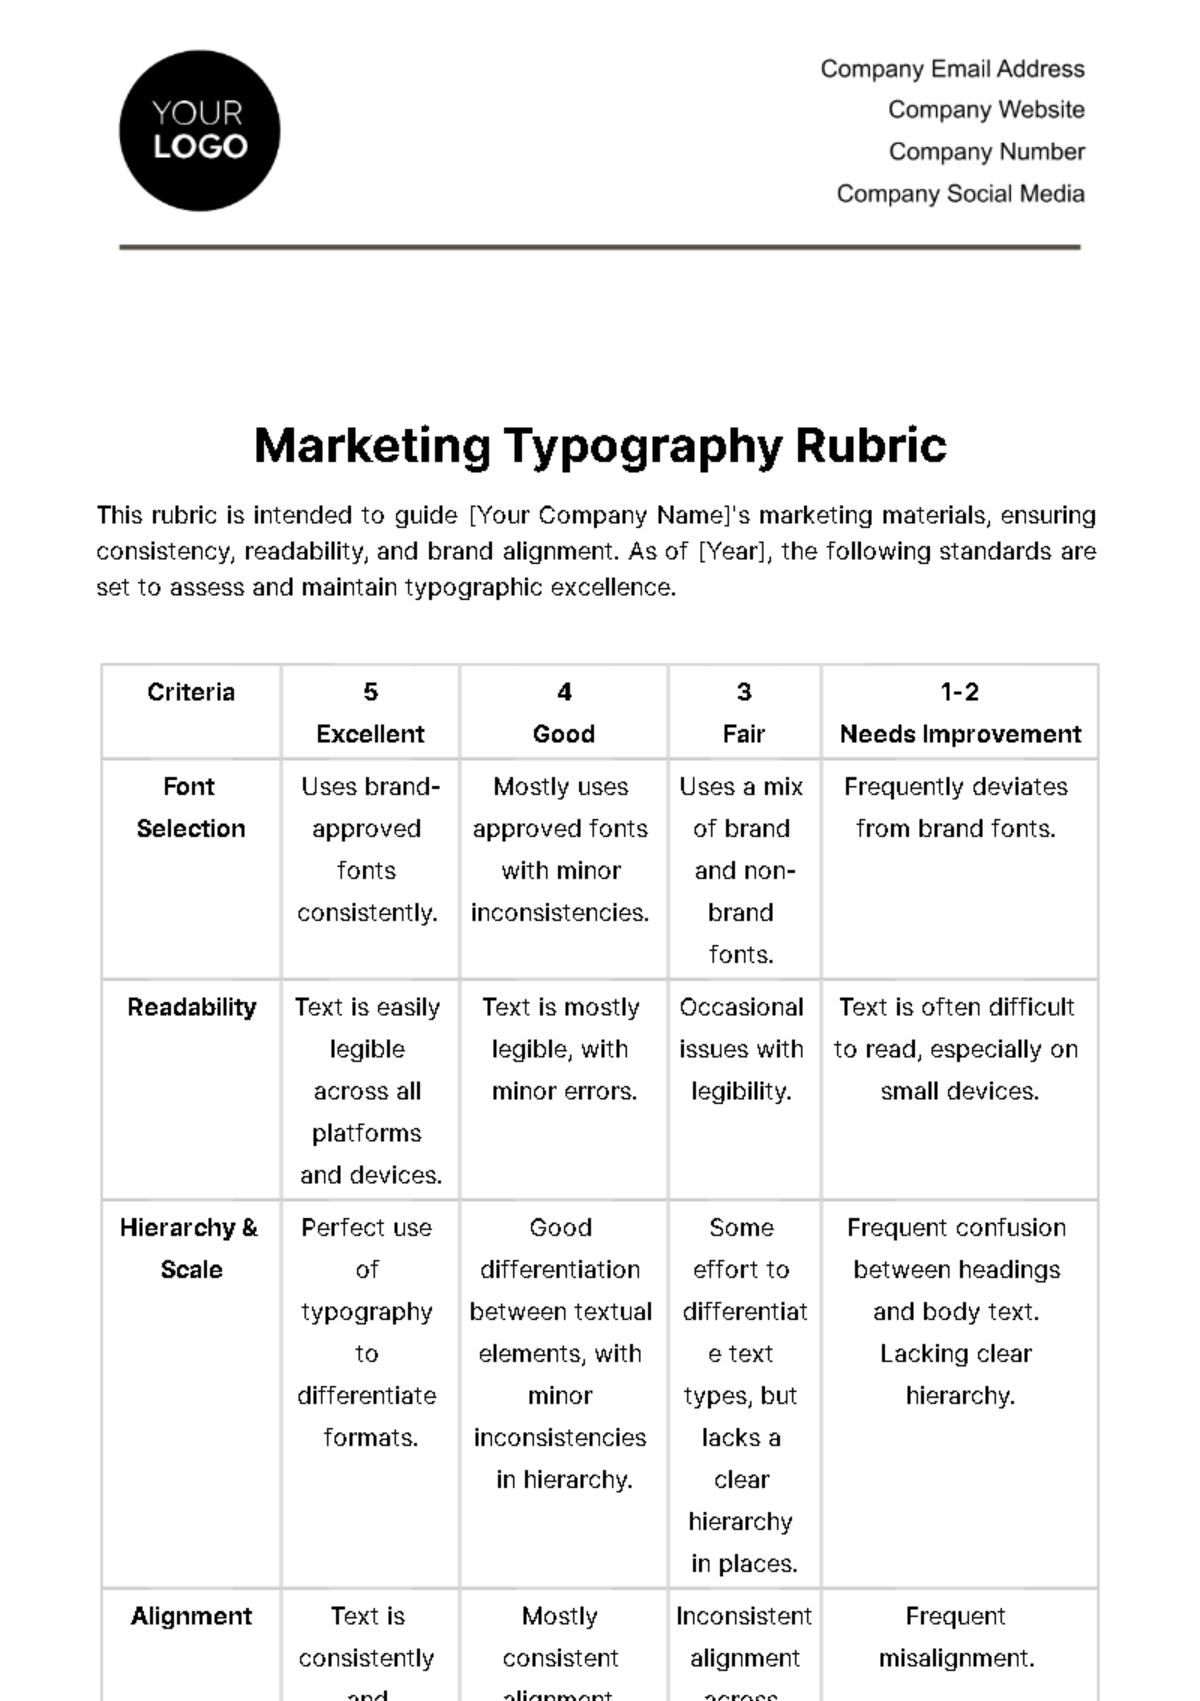 Free Marketing Typography Rubric Template